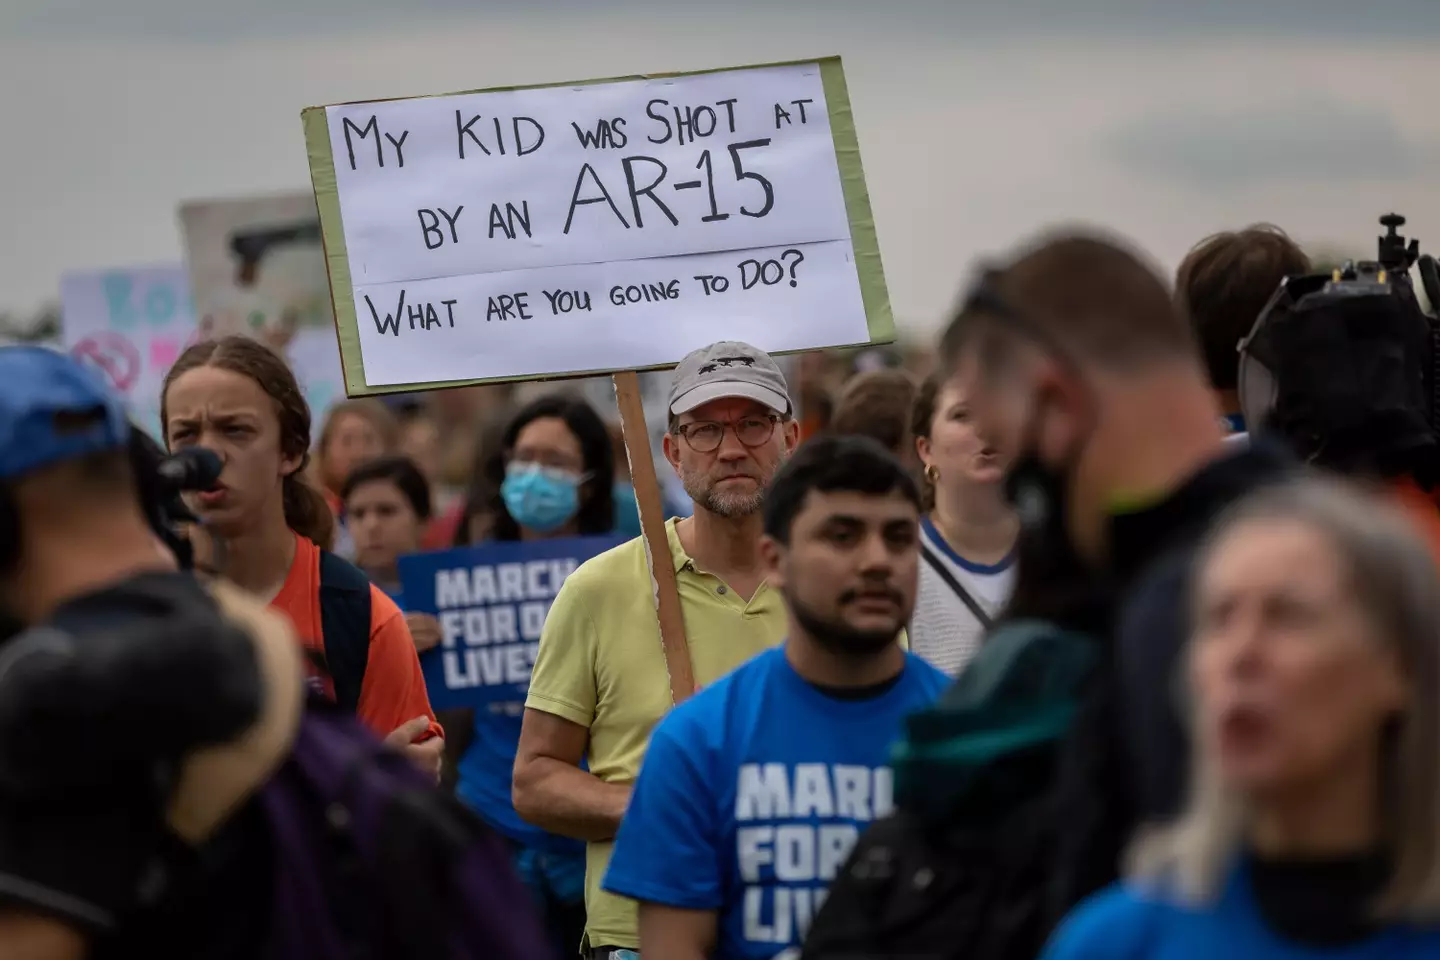 Protestors at the March For Our Lives rally in Washington DC are calling for tighter gun laws after a series of mass shootings.